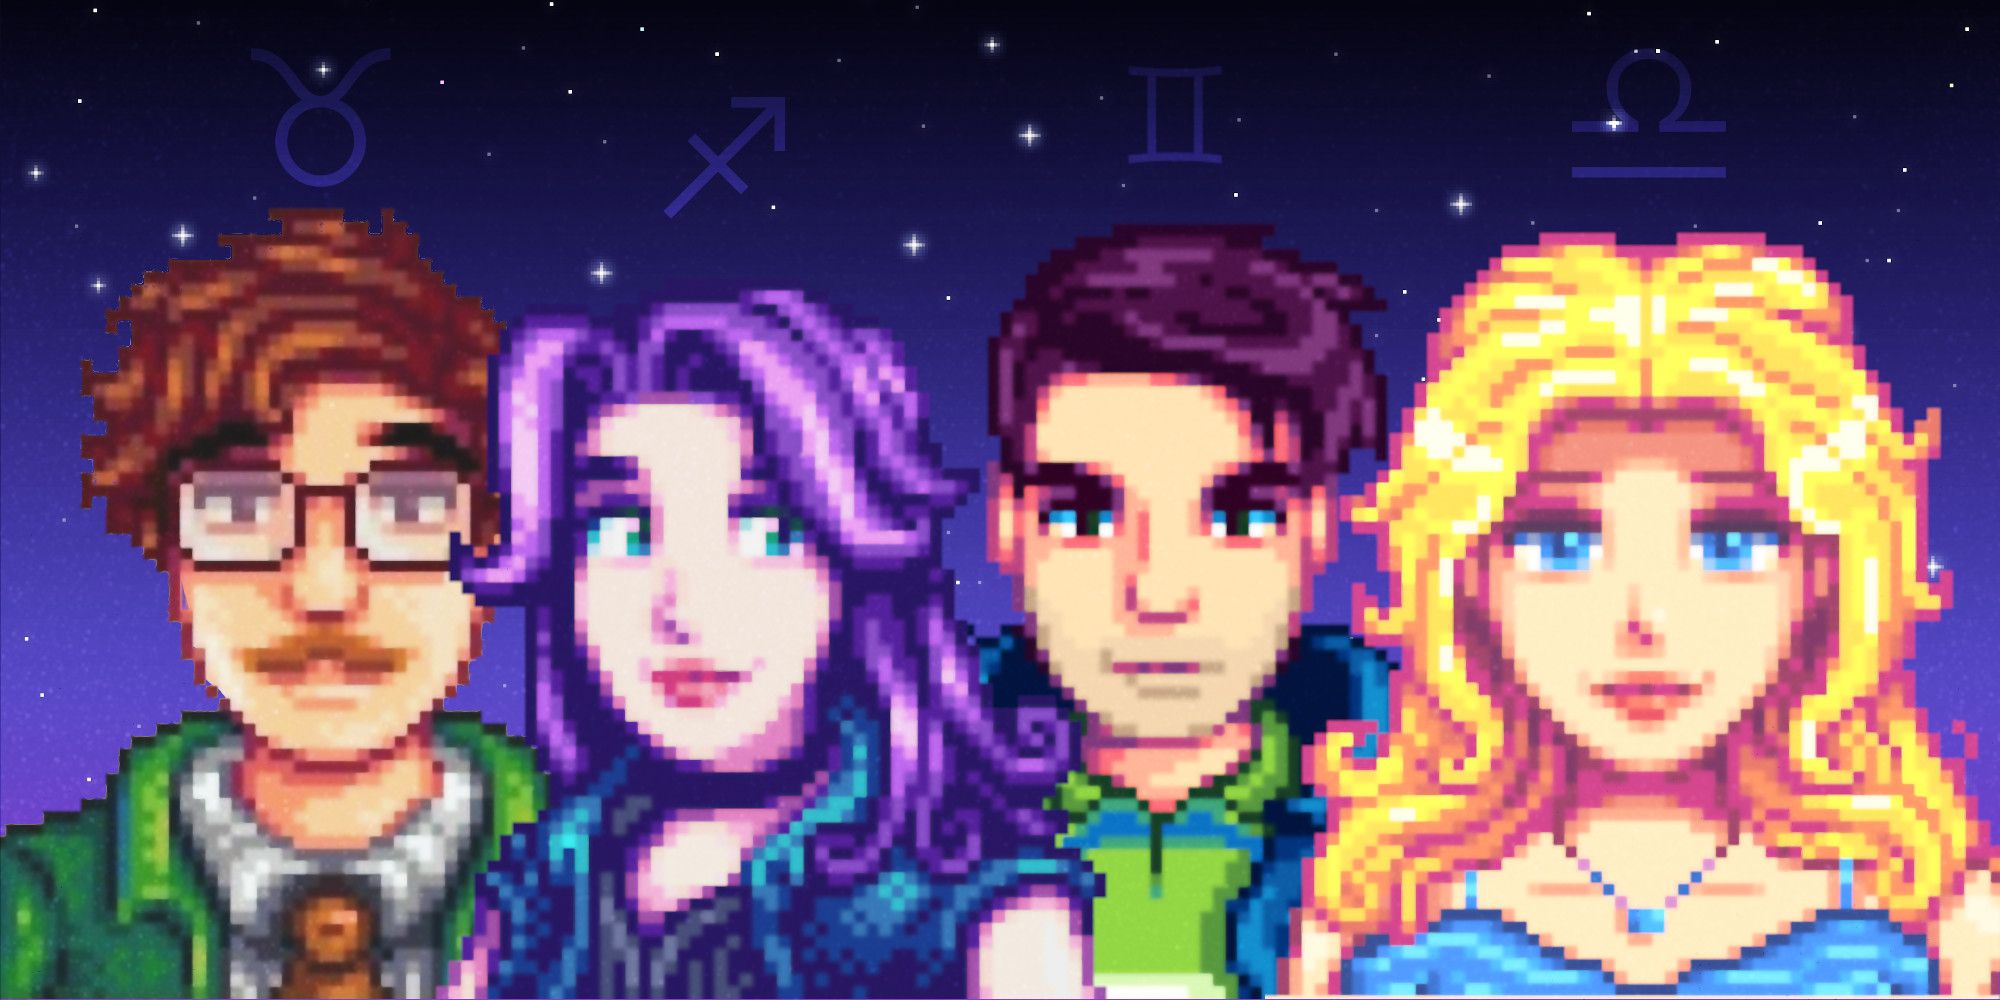 Harvey, Abigail, Shane, and Haley from Stardew Valley in front of a pixel star background with faint zodiac symbols above them